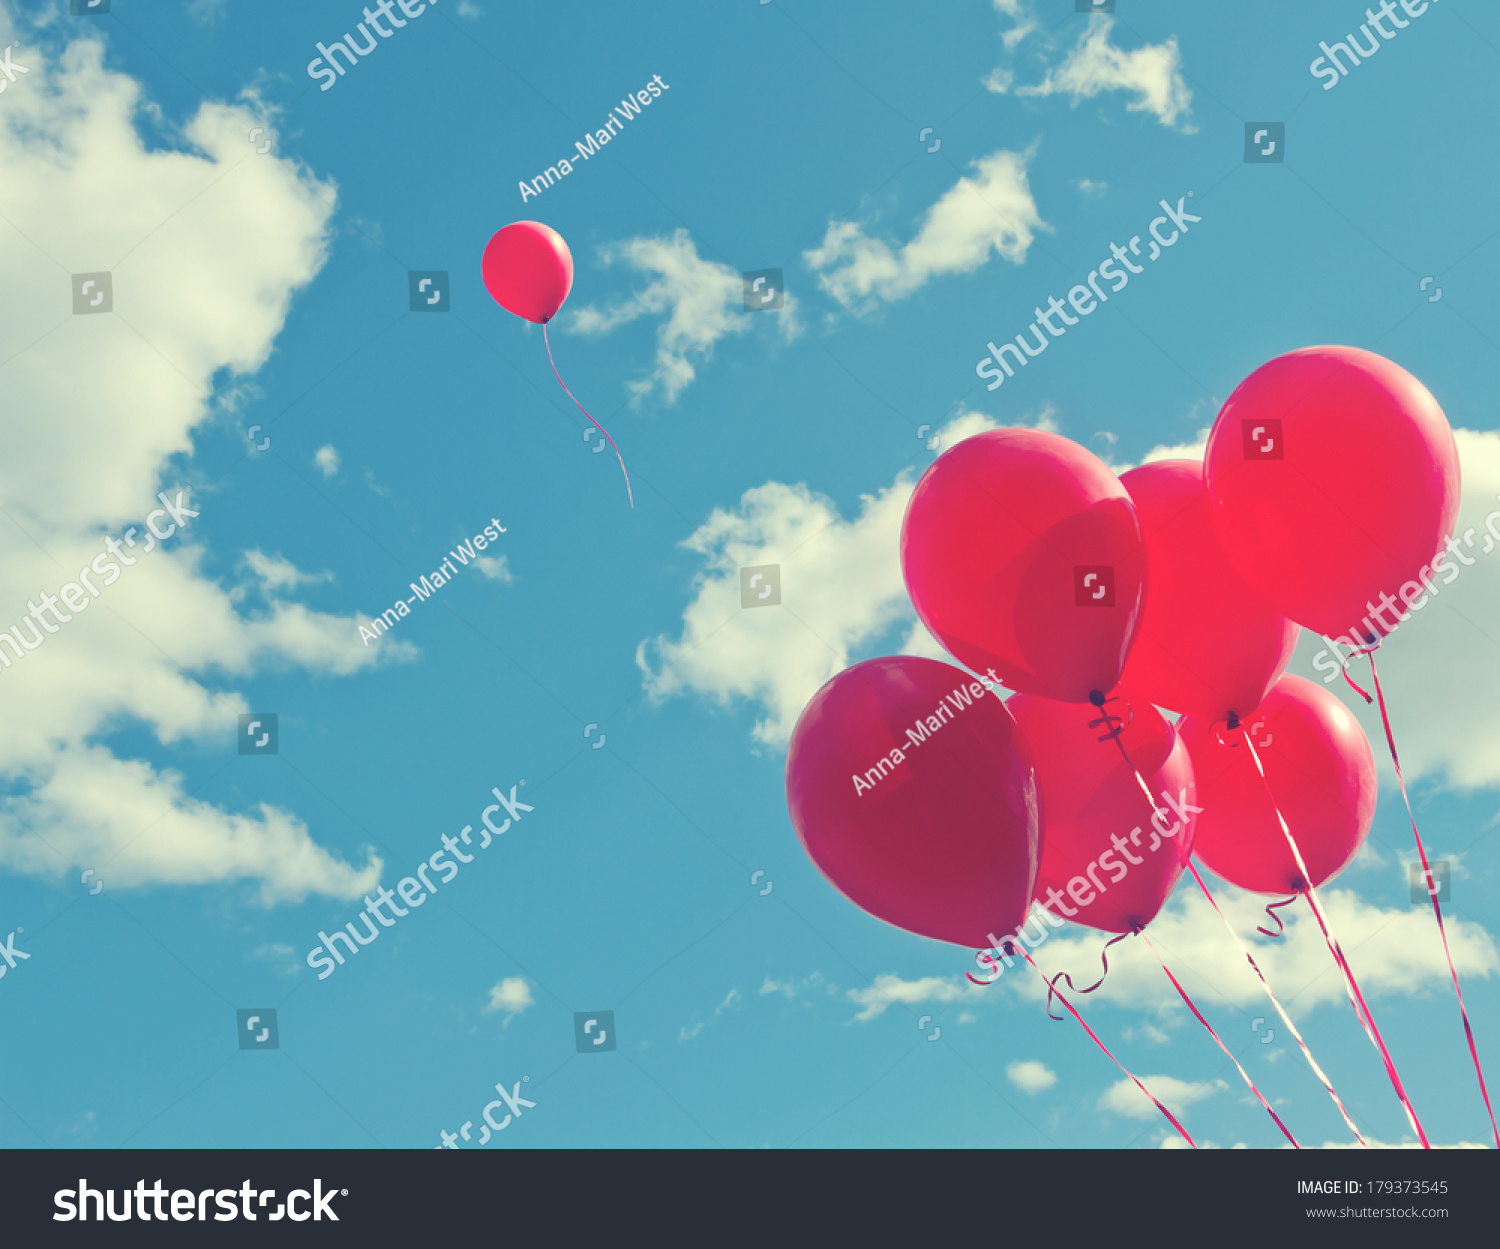 Bunch of red balloons on a blue sky with one balloon escaping to be individual and free - concept for following one's dreams #179373545